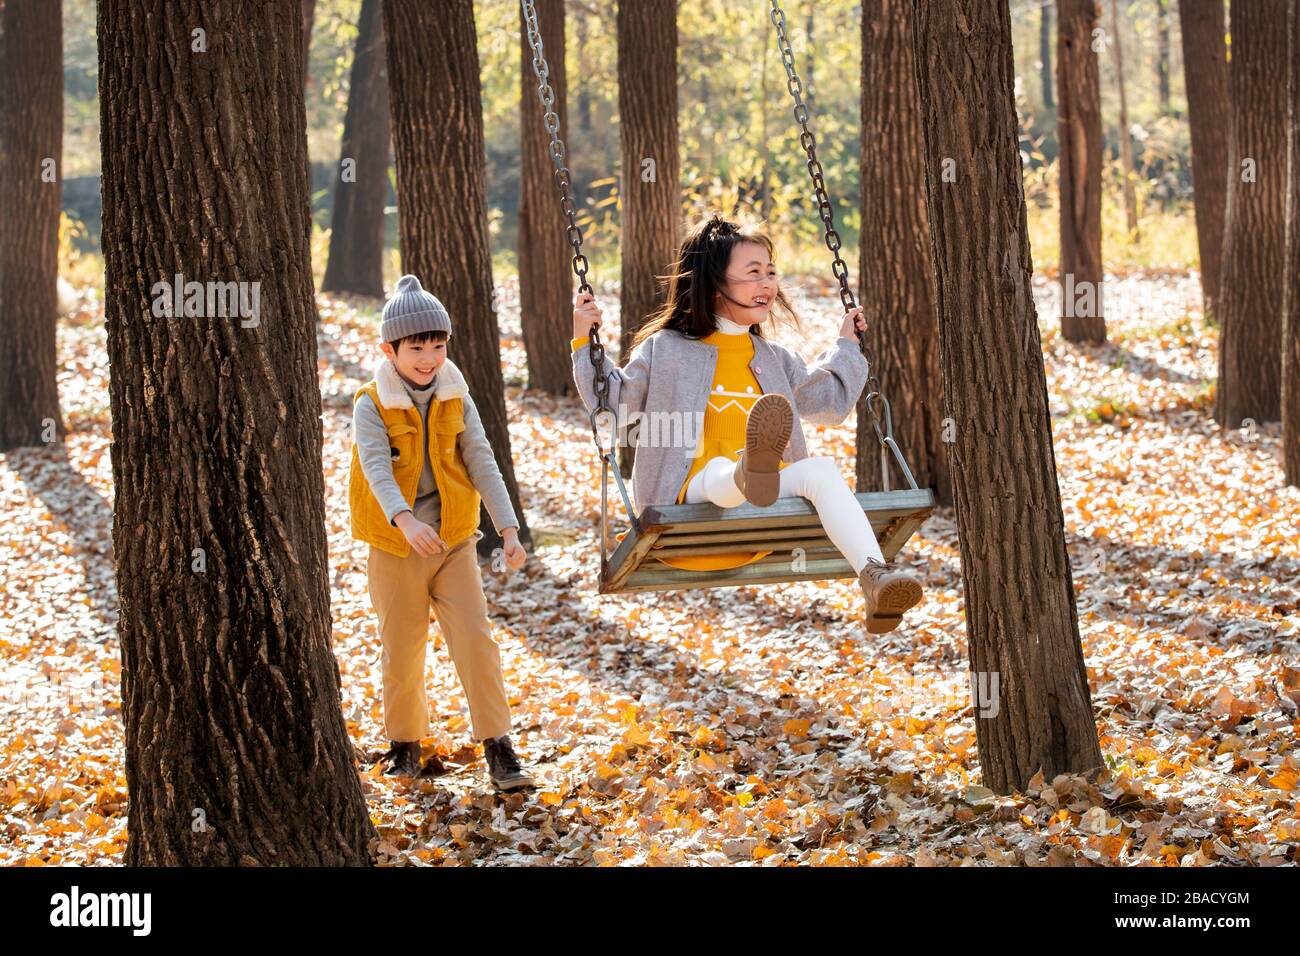 Outdoor happy little boy pushed the cute girl riding on the swing Stock Photo